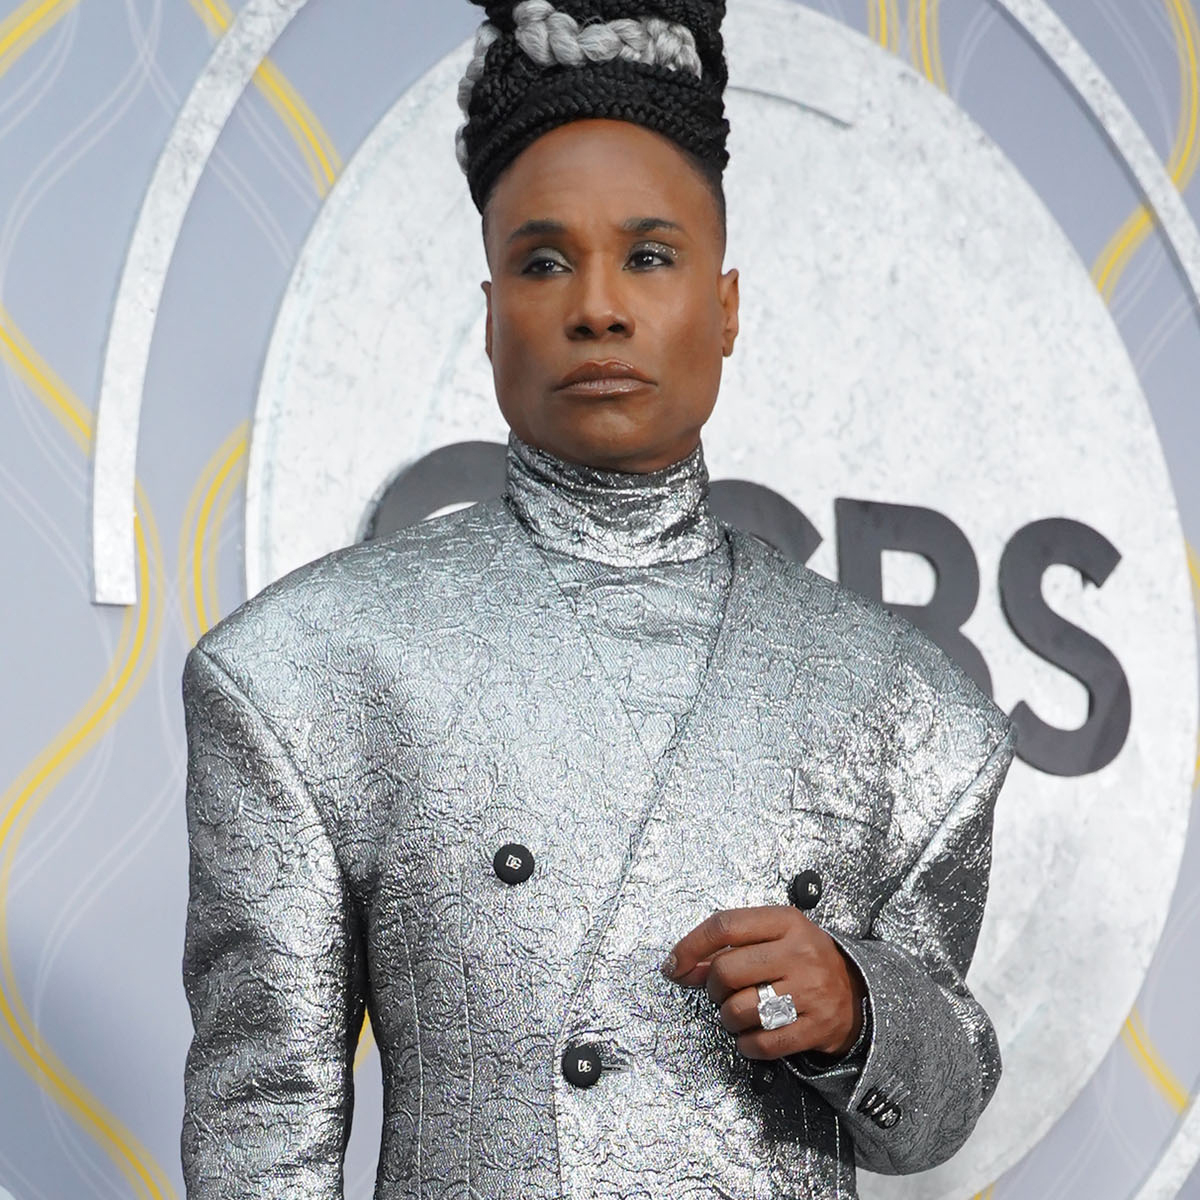 Why Billy Porter Calls His Queerness His “Superpower”